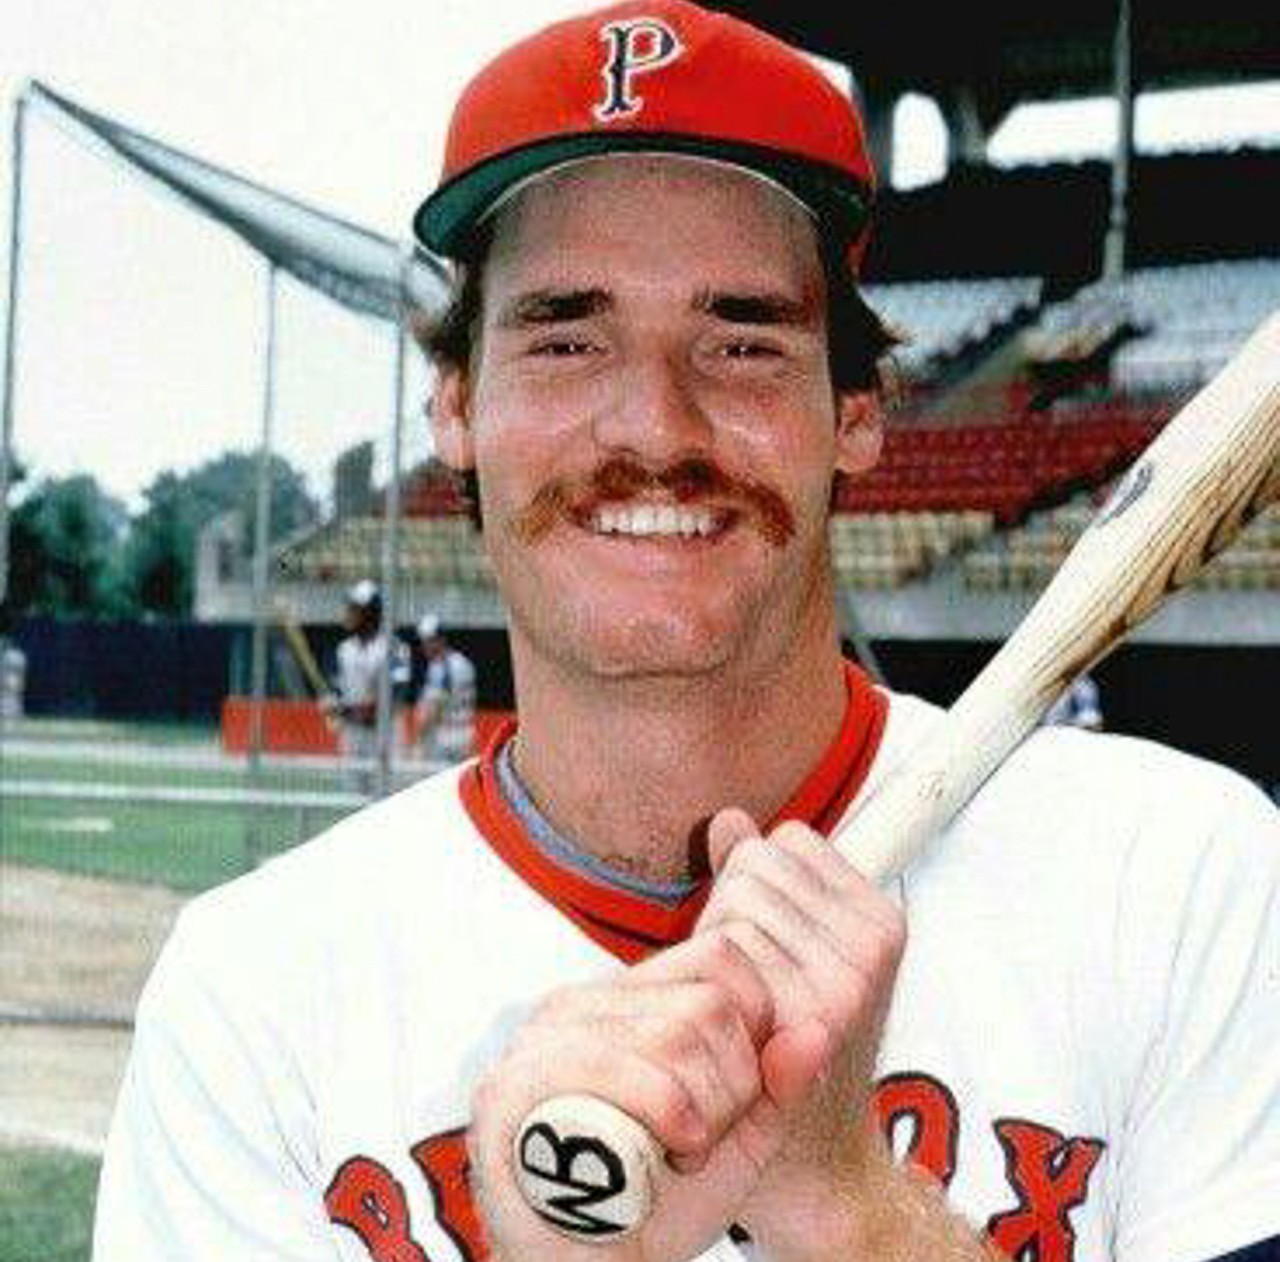 Wade Boggs - H.B. Plant (1976)
Boggs&#146; 18-year baseball career was primarily spent with the Boston Red Sox, but he also played for the New York Yankees and the Tampa Bay Rays. 
Photo via Wade Boggs/Facebook